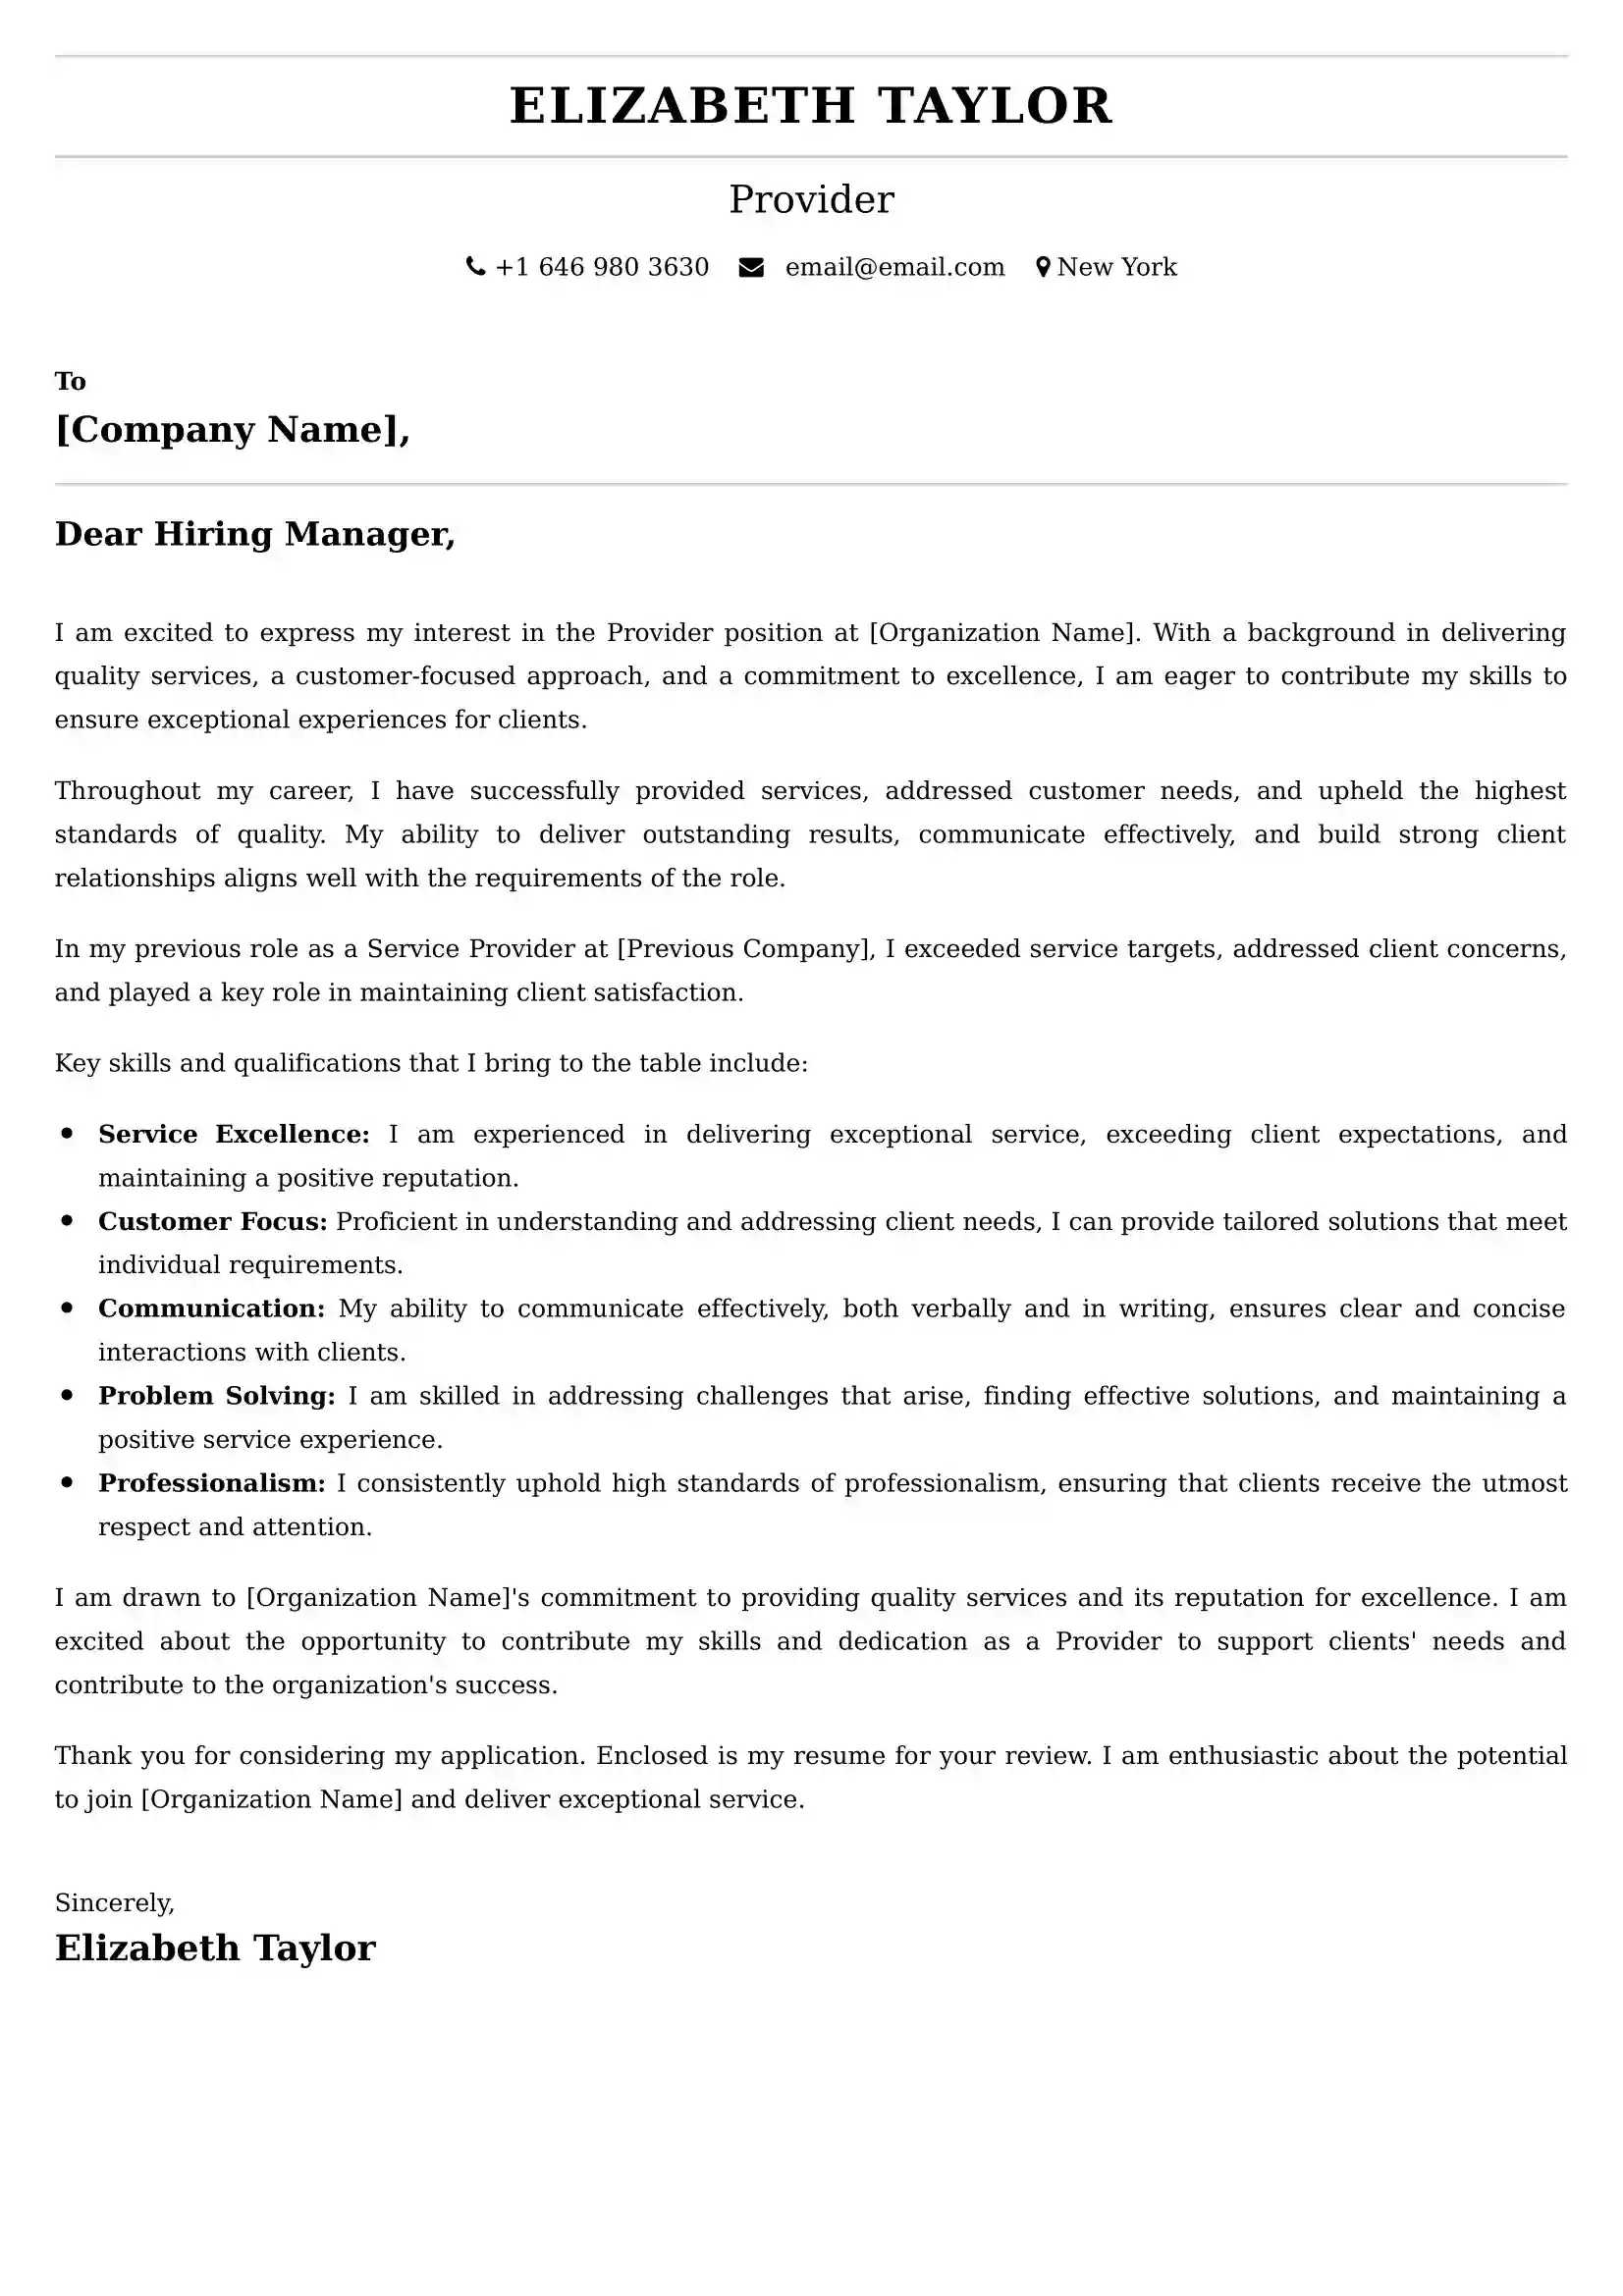 Provider Cover Letter Examples -Latest Brazilian Templates